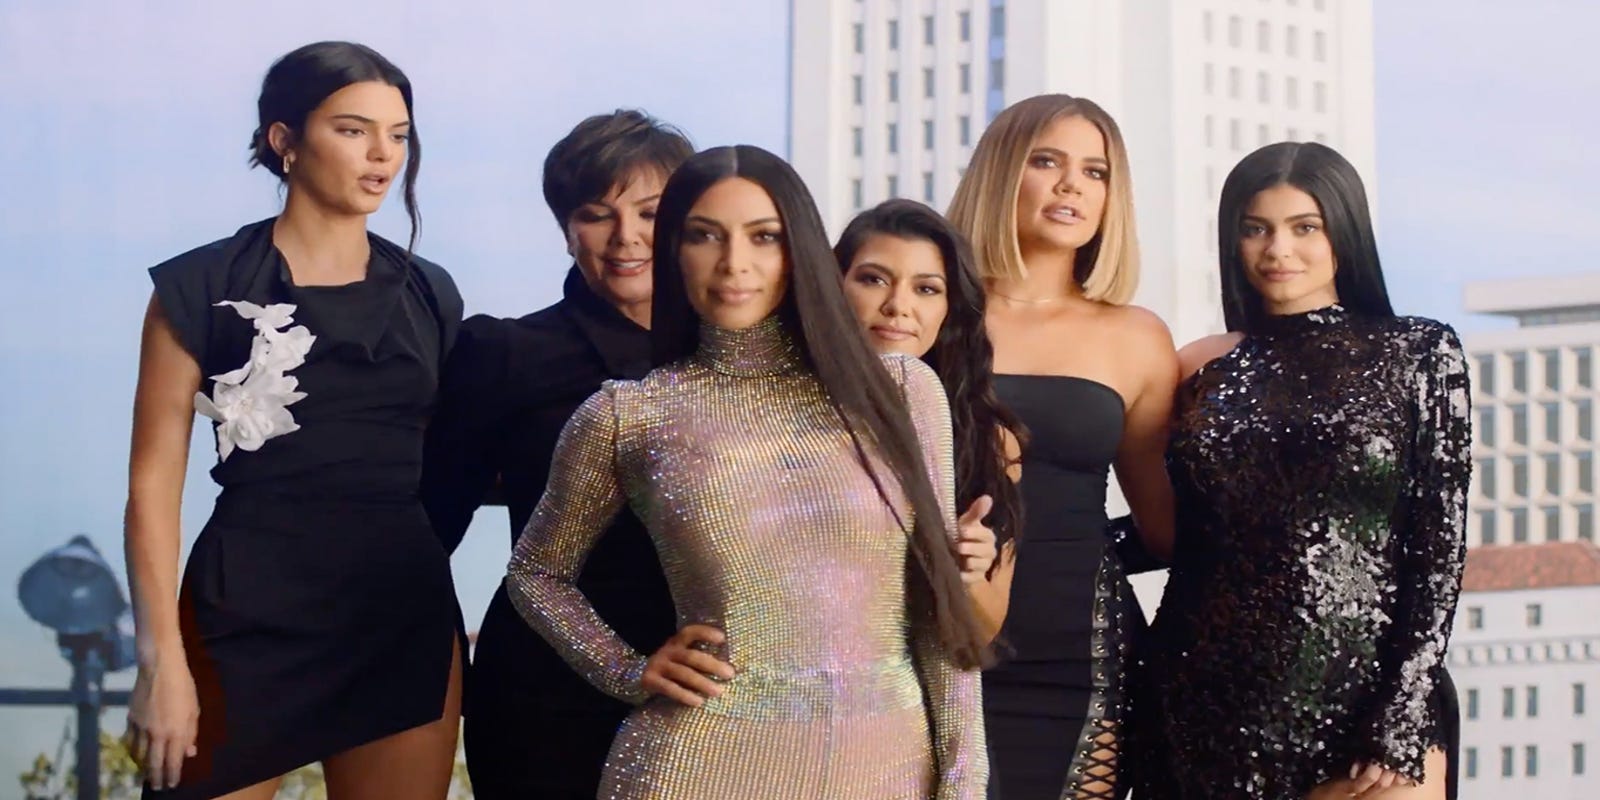 'Keeping Up With The Kardashians' shows Kris Jenner's La Quinta home